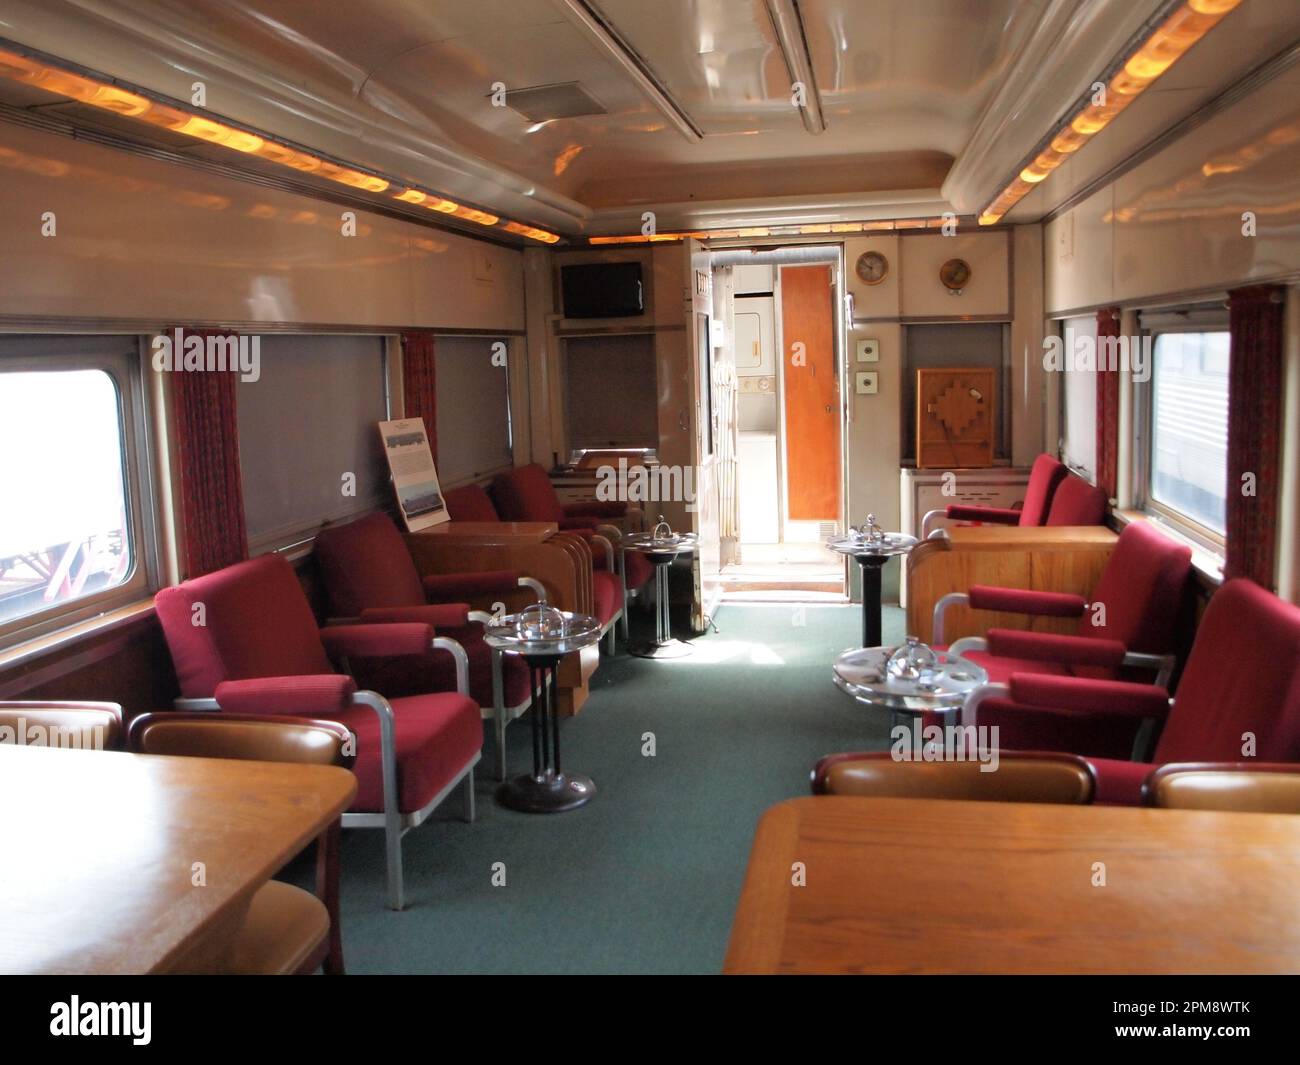 Interior of old-style US railroad passenger cars showing the luxurious amenities of the day. Stock Photo